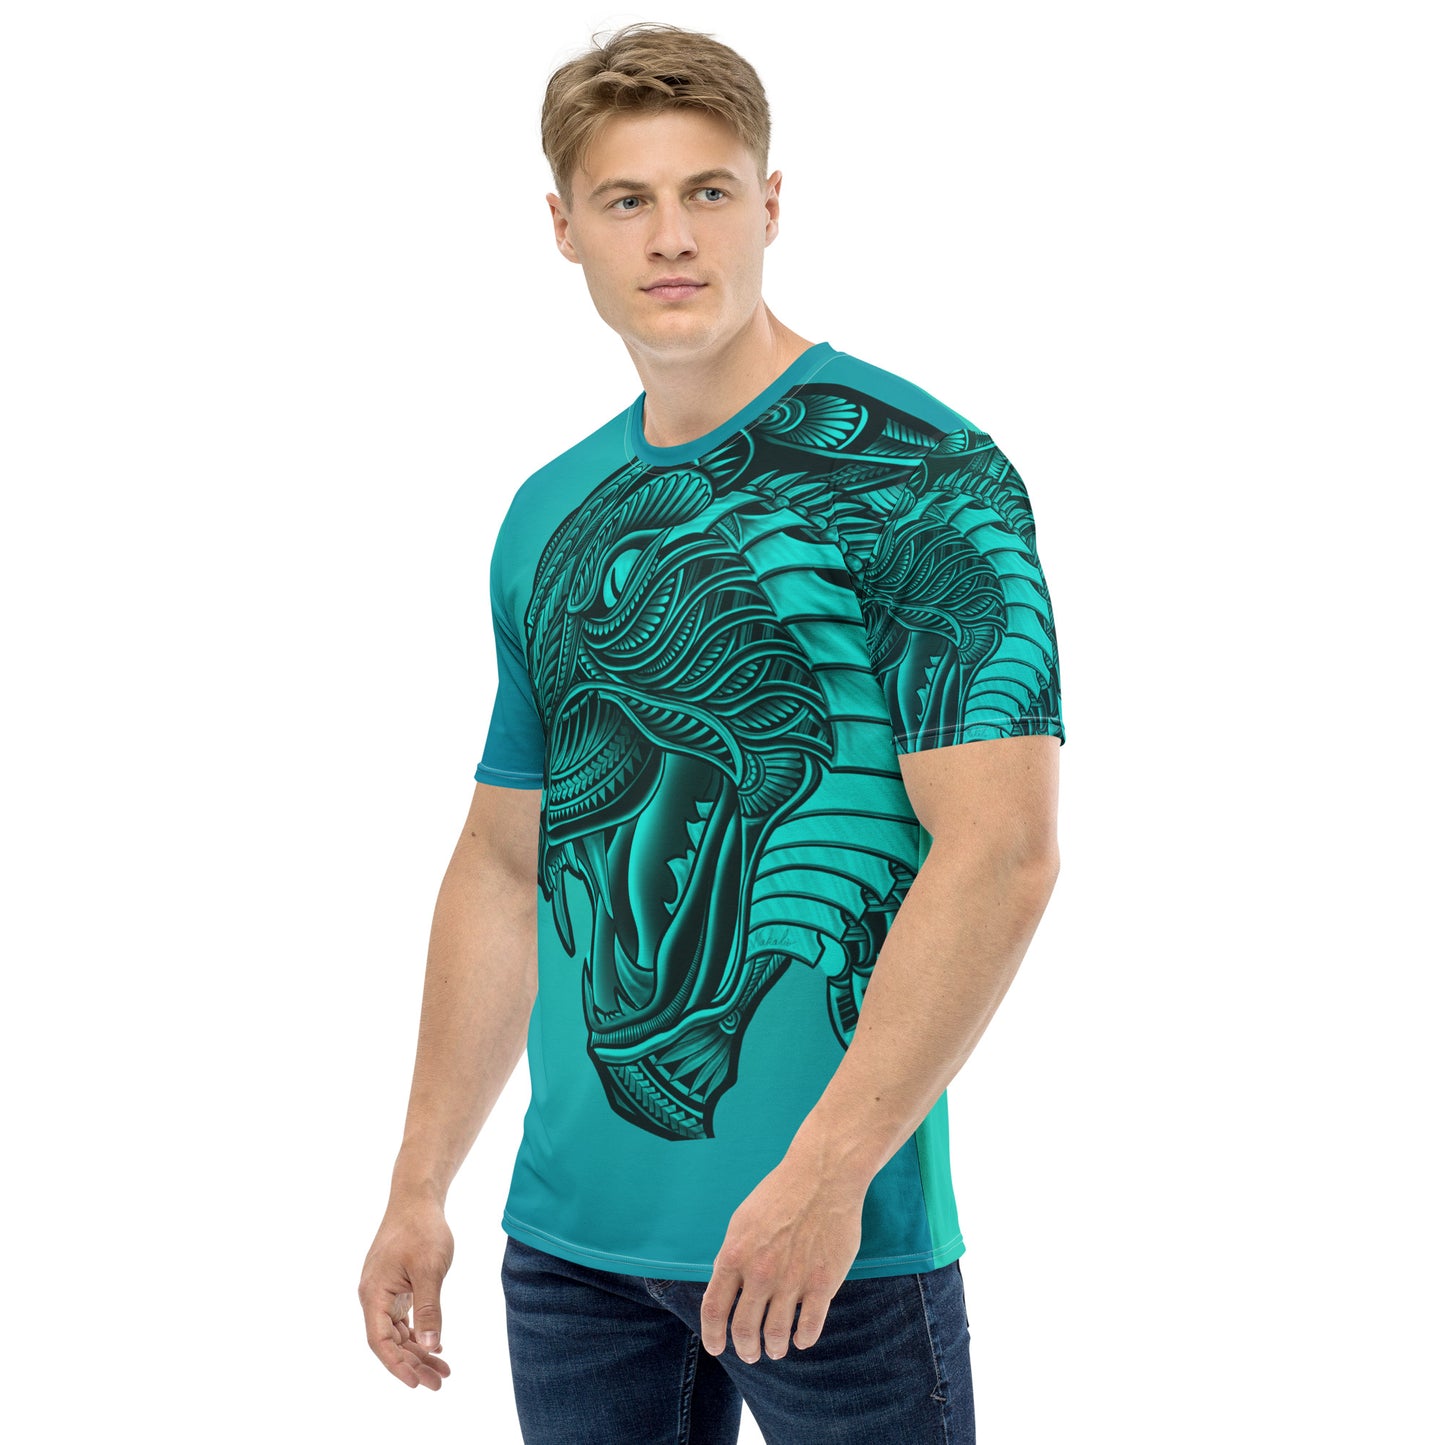 Pacific-Style Tiger Tattoo Tee - Blue Gradient